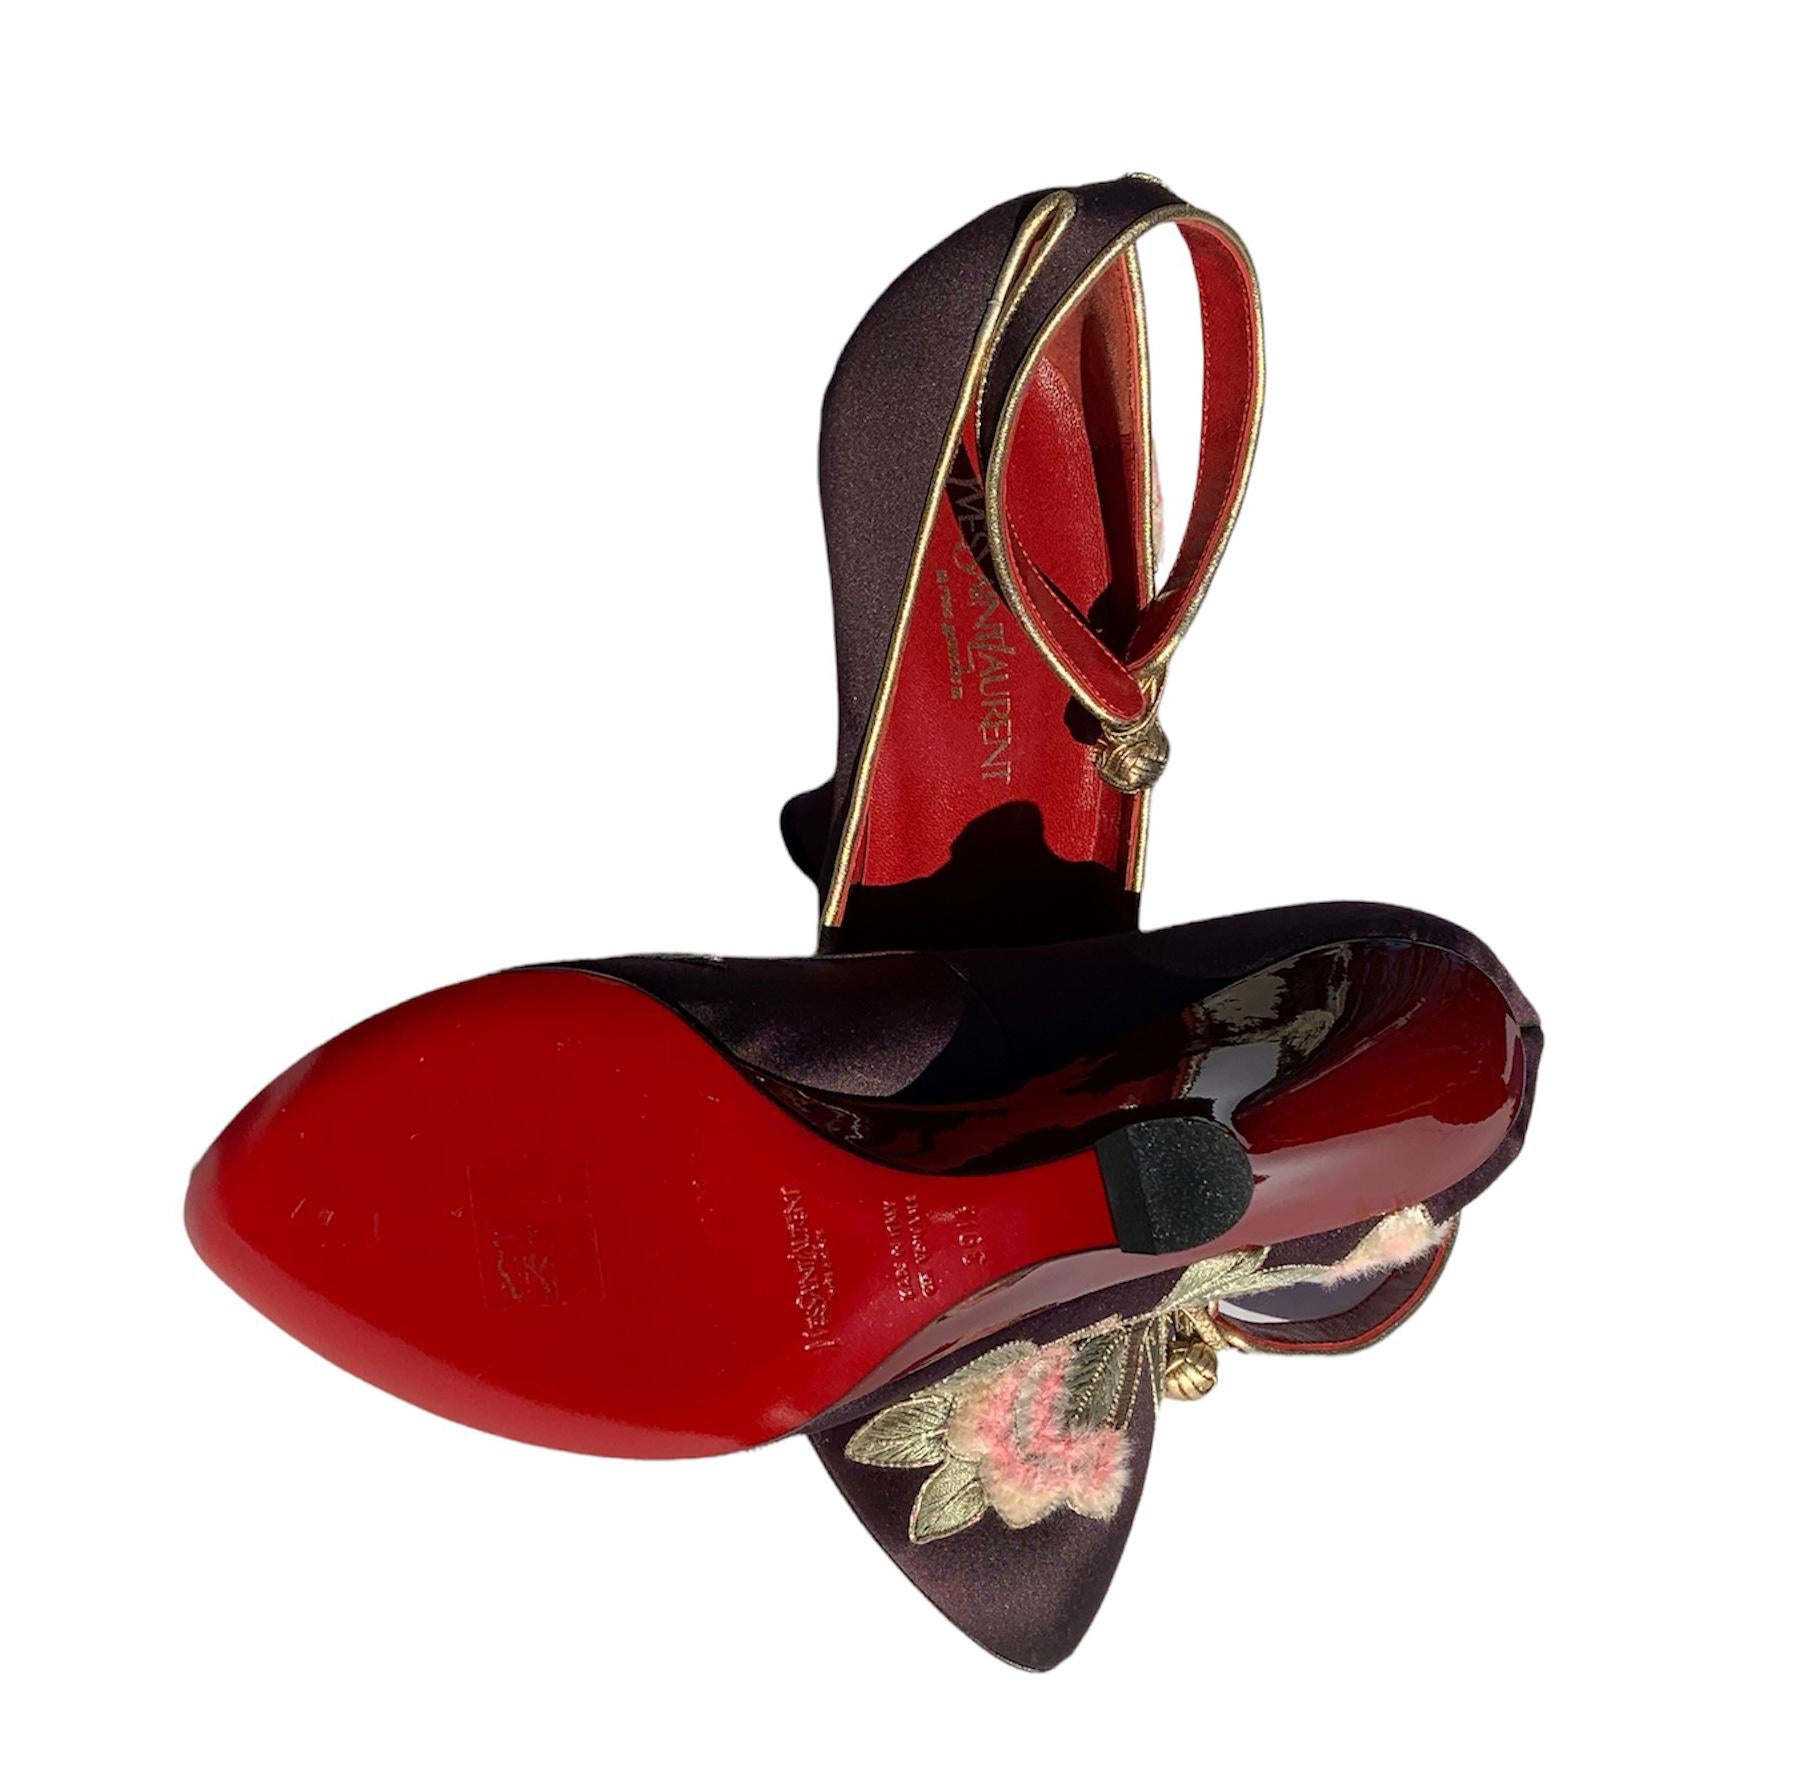 New Tom Ford for Yves Saint Laurent F/W 2004 *Opium* Lotus Pumps Shoes 39.5  9.5 For Sale 3